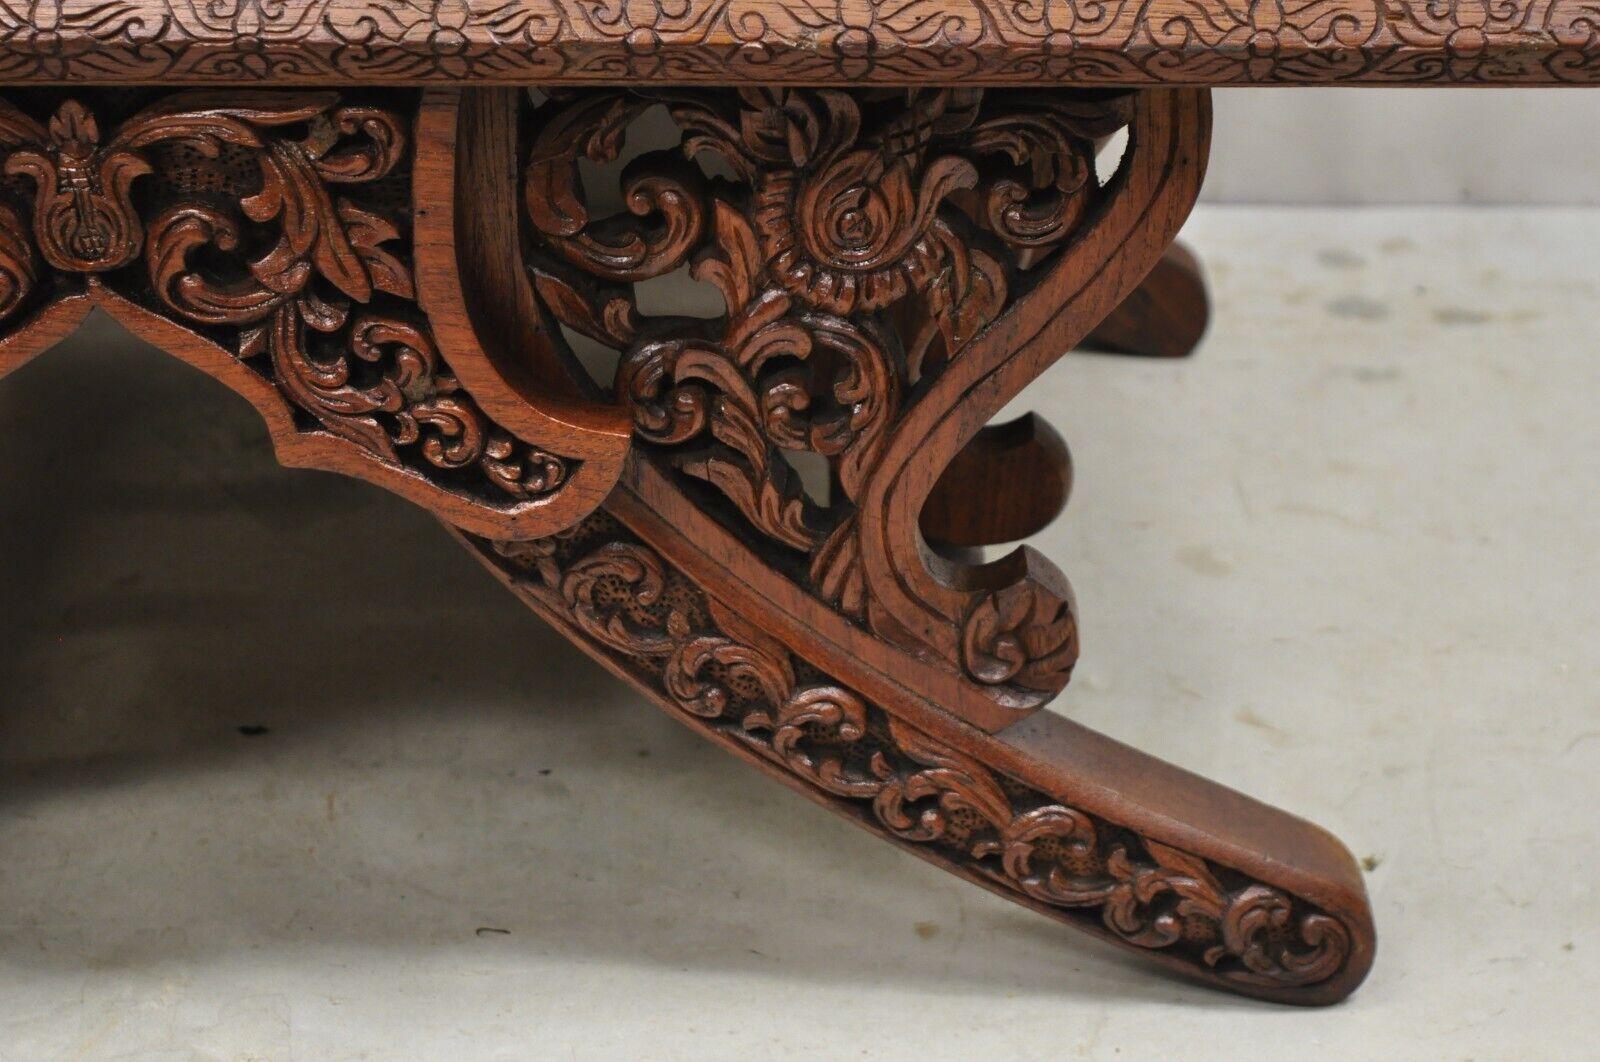 Vintage Chinoiserie Carved Teak Wood Howdah Elephant Saddle Accent Chair For Sale 6